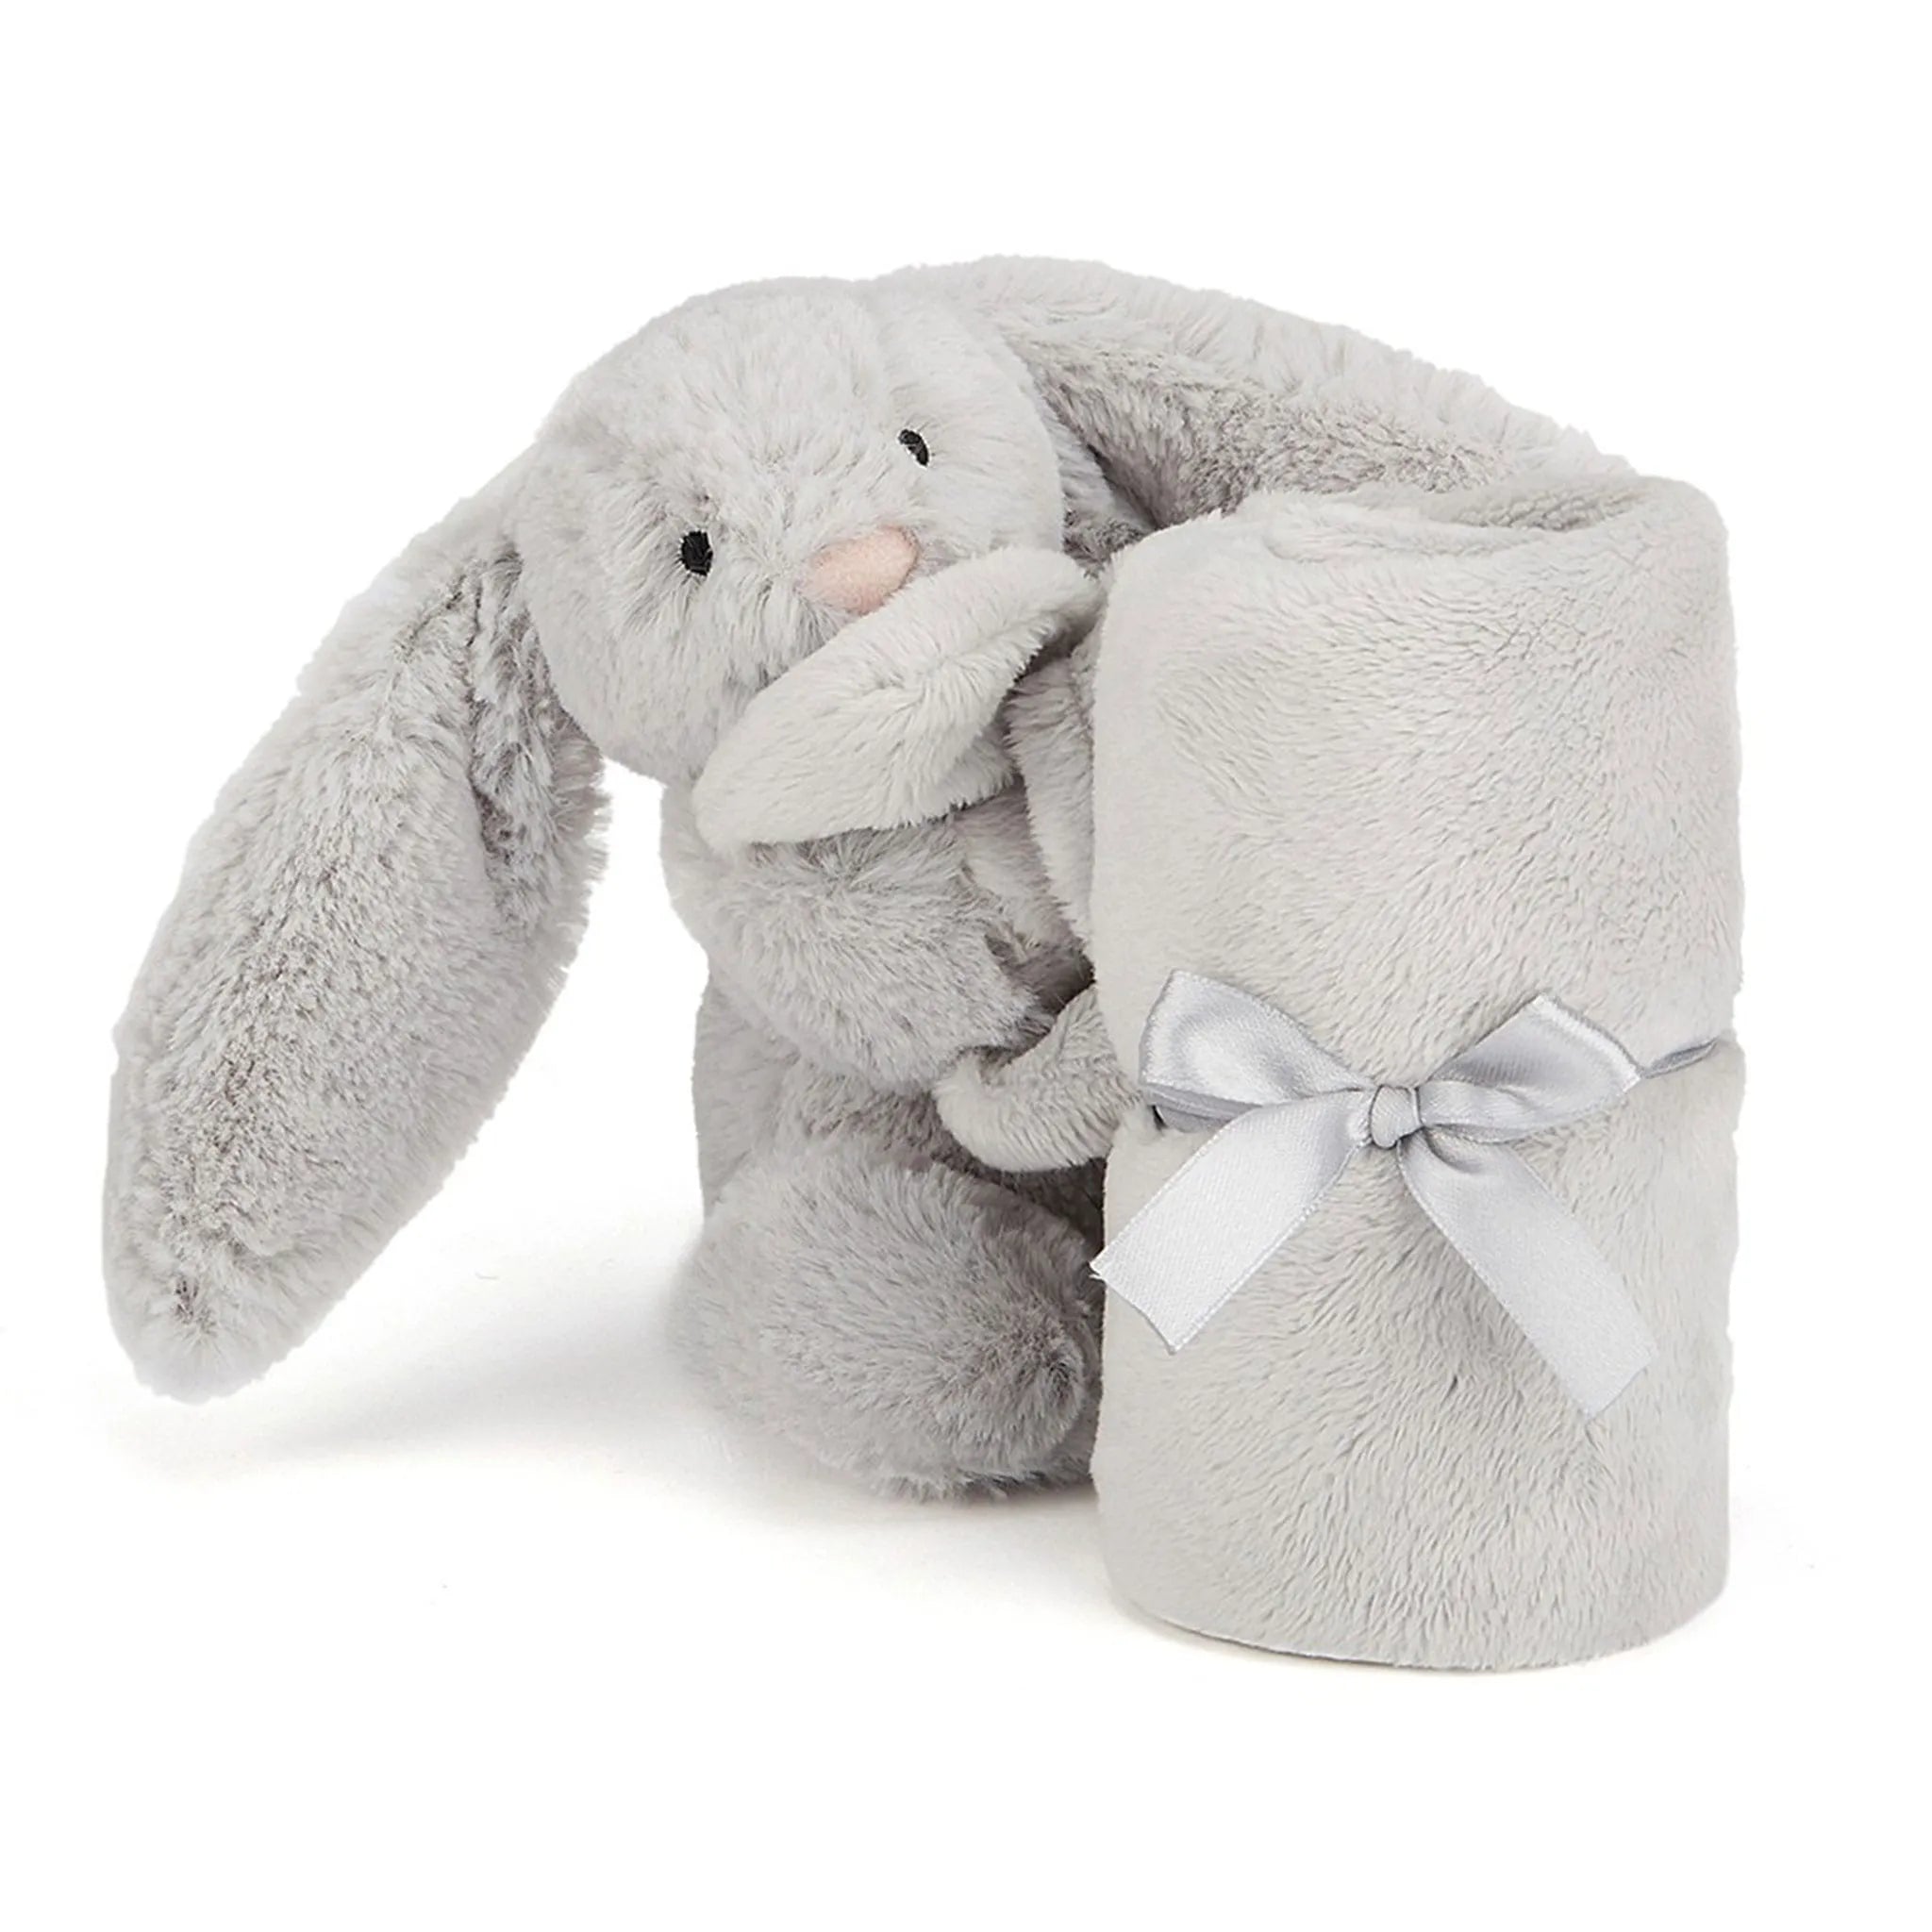 Jellycat - Grey Rabbit Bashful Soother